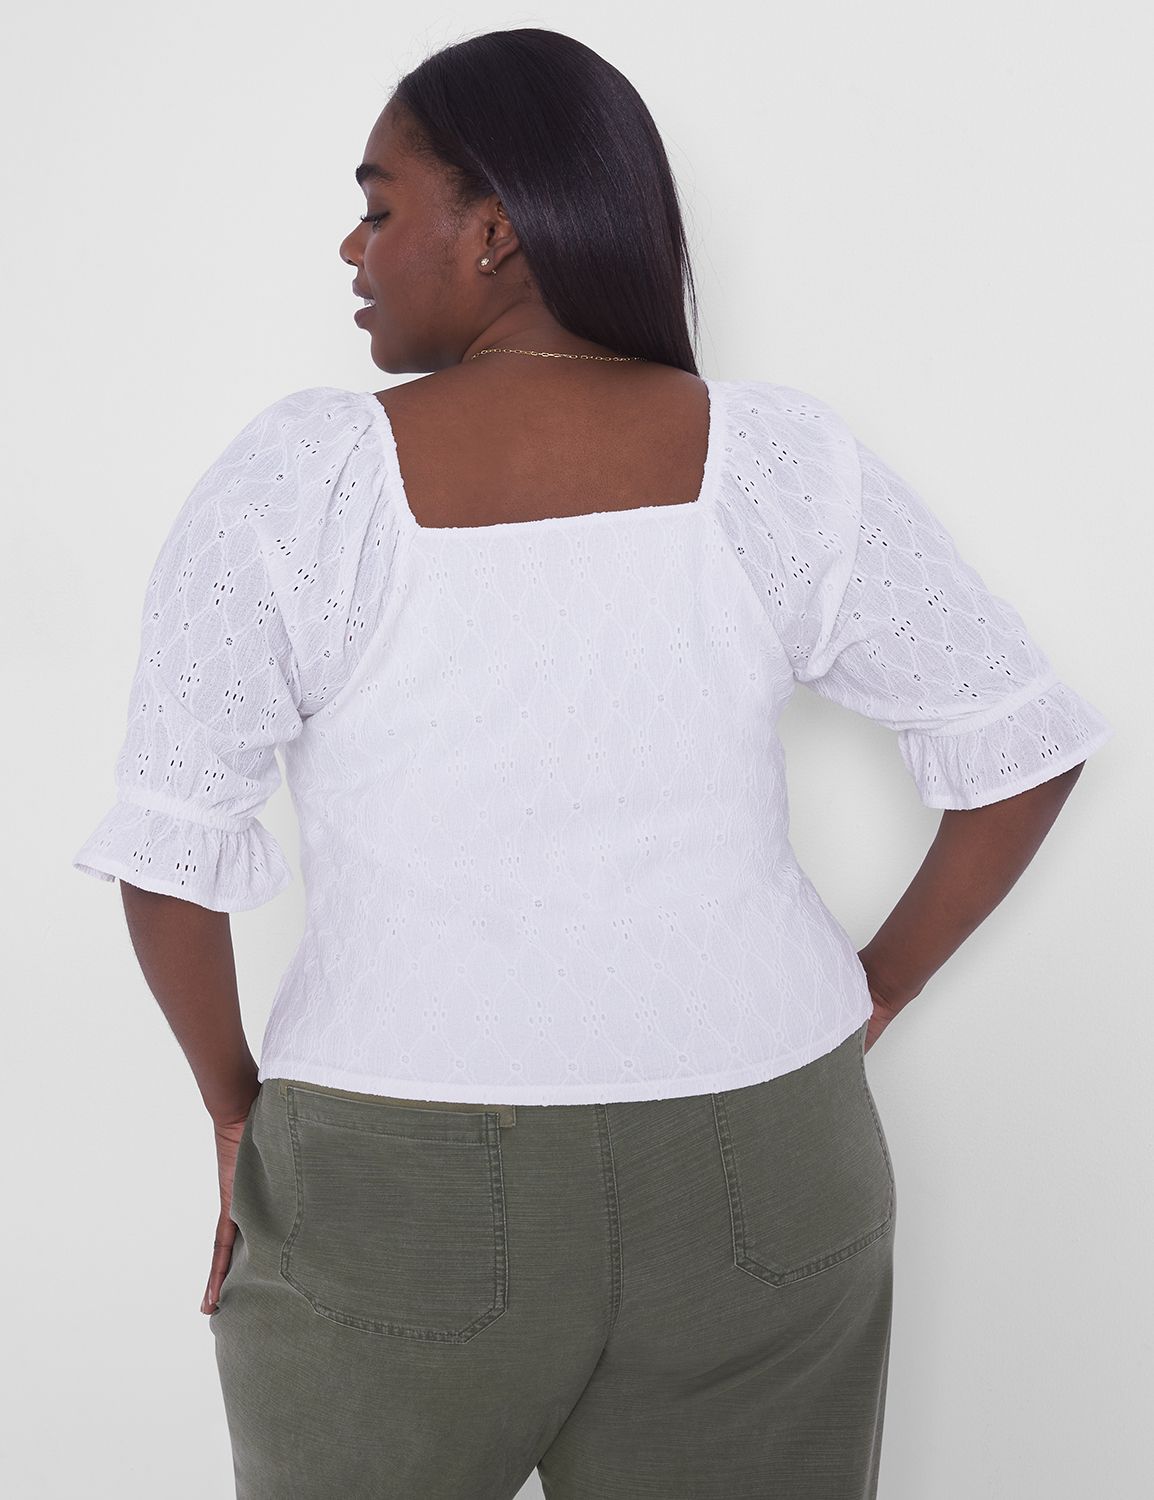 Terra & Sky Plus Size Waffle V-Neck Tee, Time and Tru High Rise